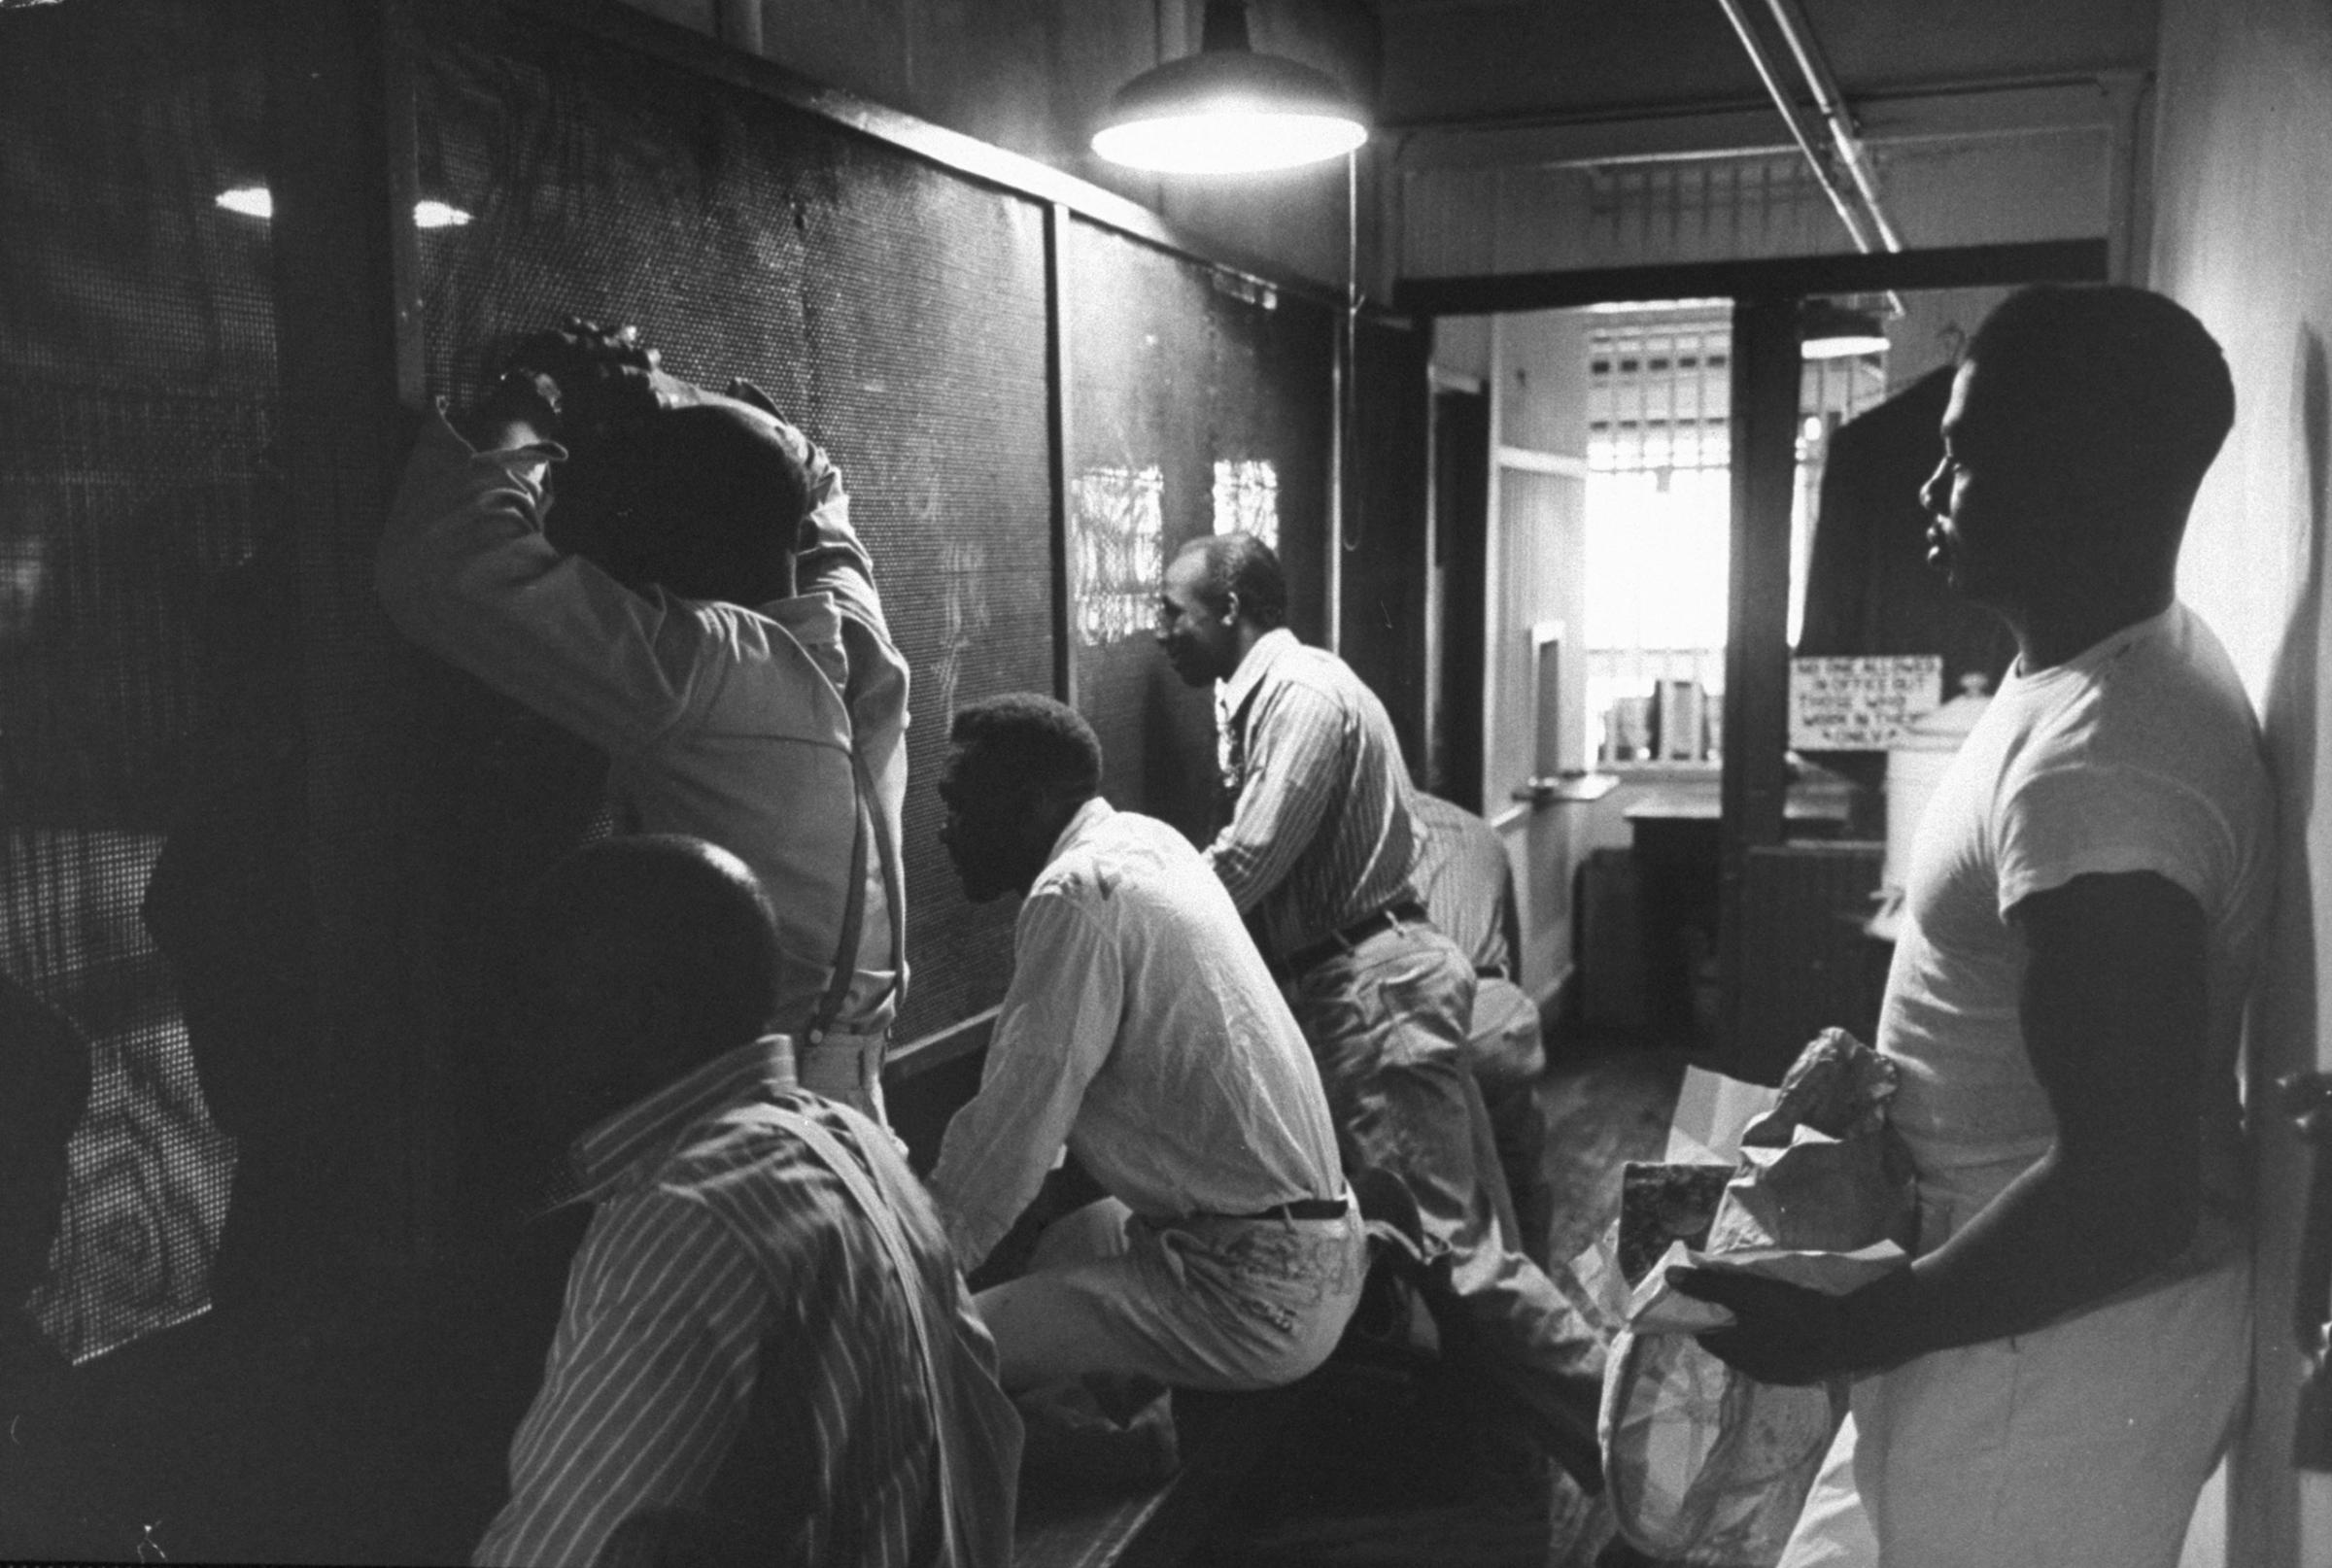 Prisoners talk through heavy screens to friends and relatives, Tennessee State Penitentiary, 1953.